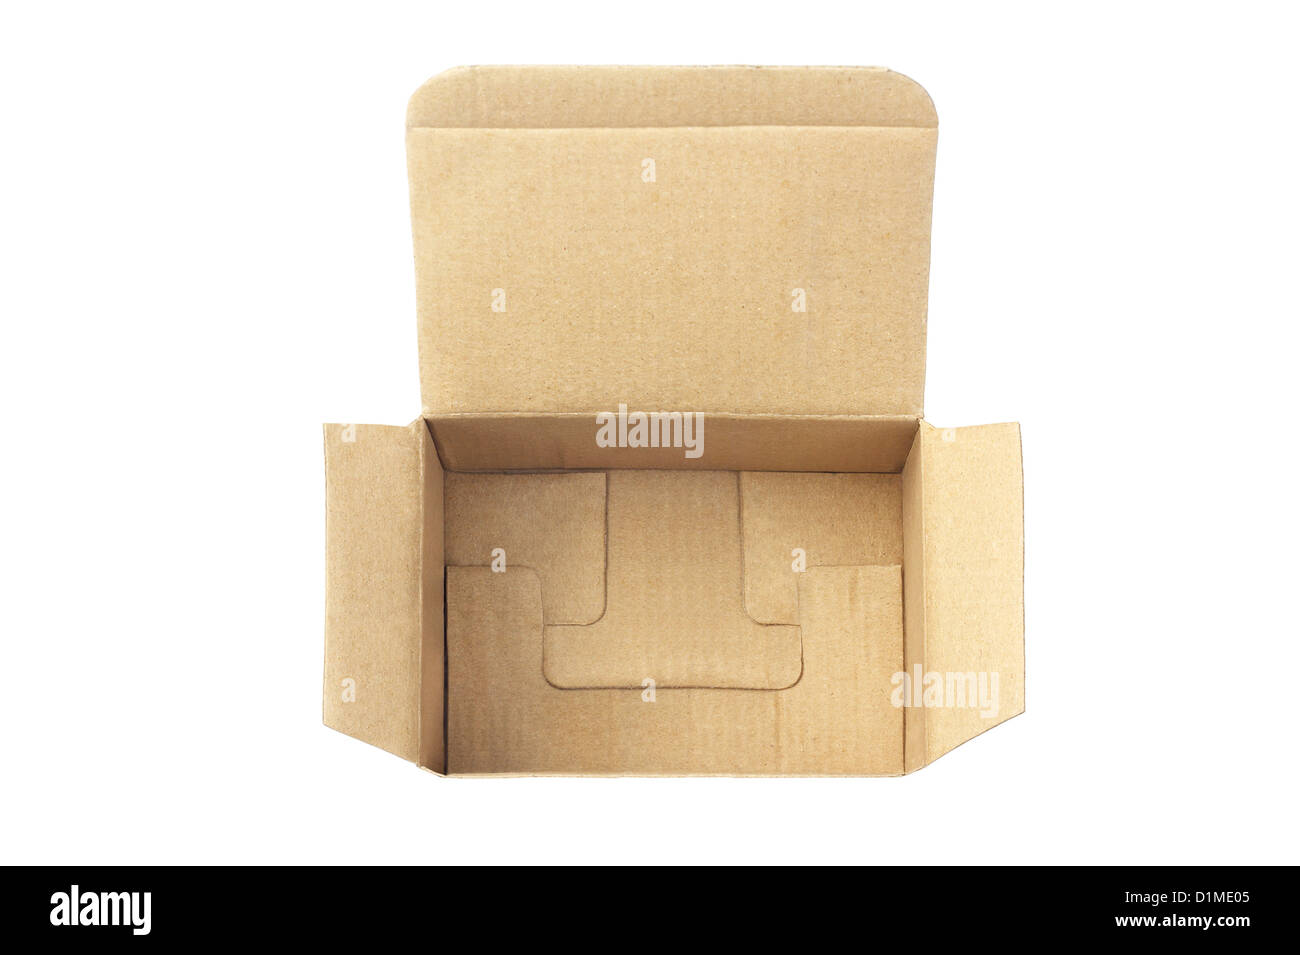 Elevated View of an Open Cardboard Box on White Background Stock Photo